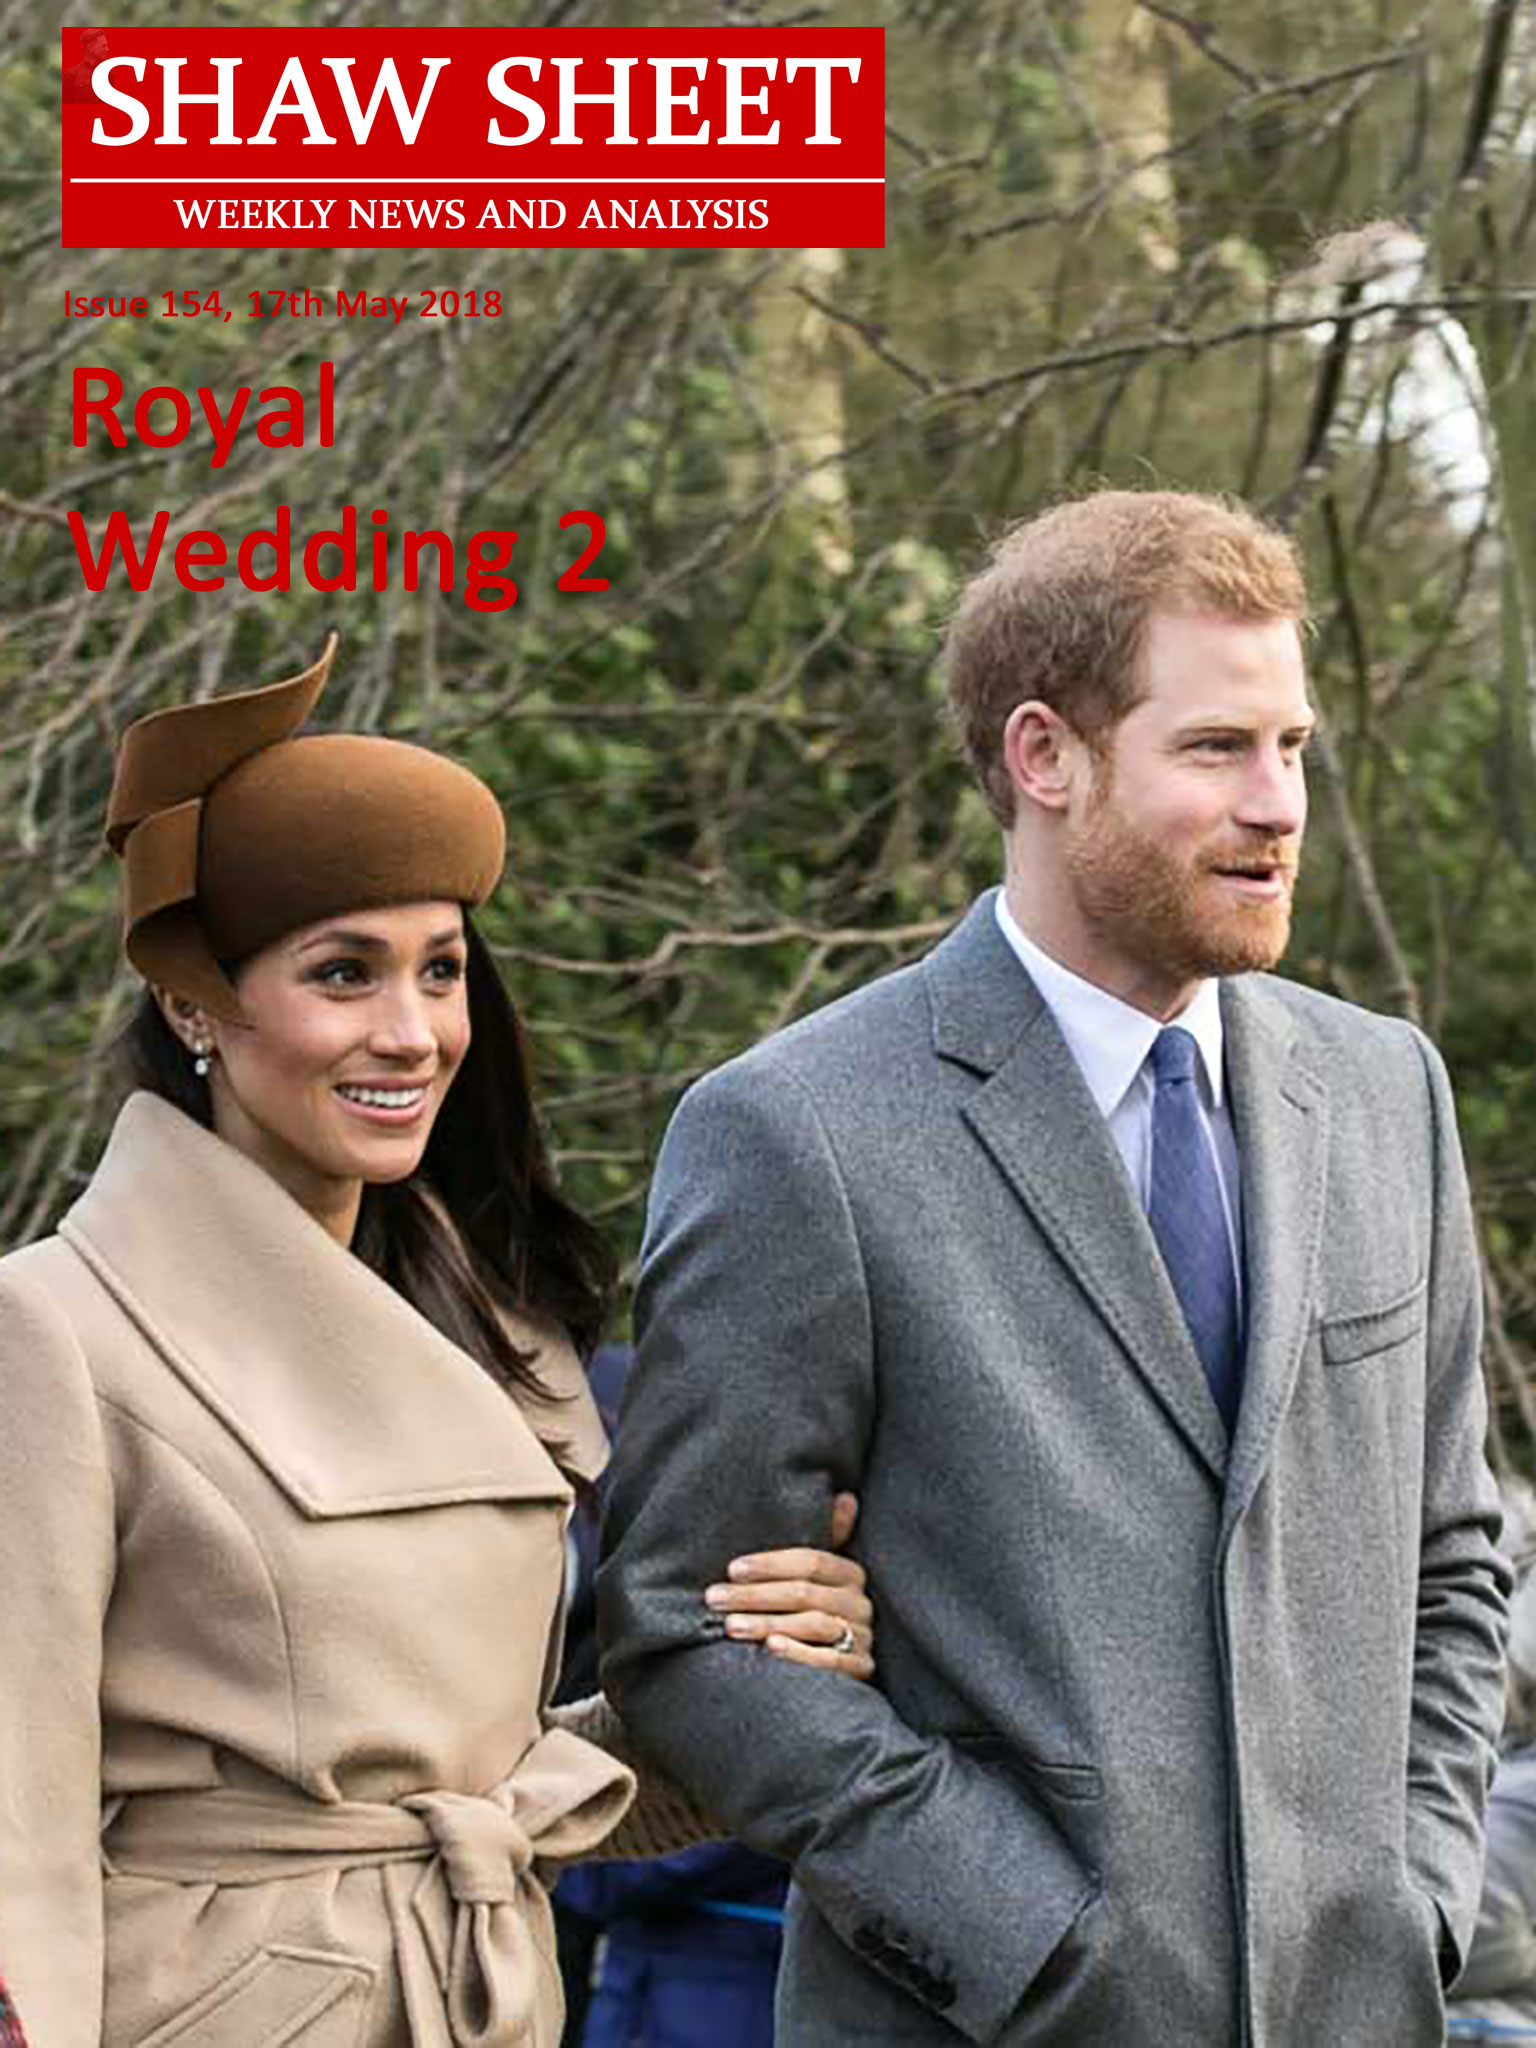 Cover Image Royal Wedding 2 for Issue 154 17 May 2018